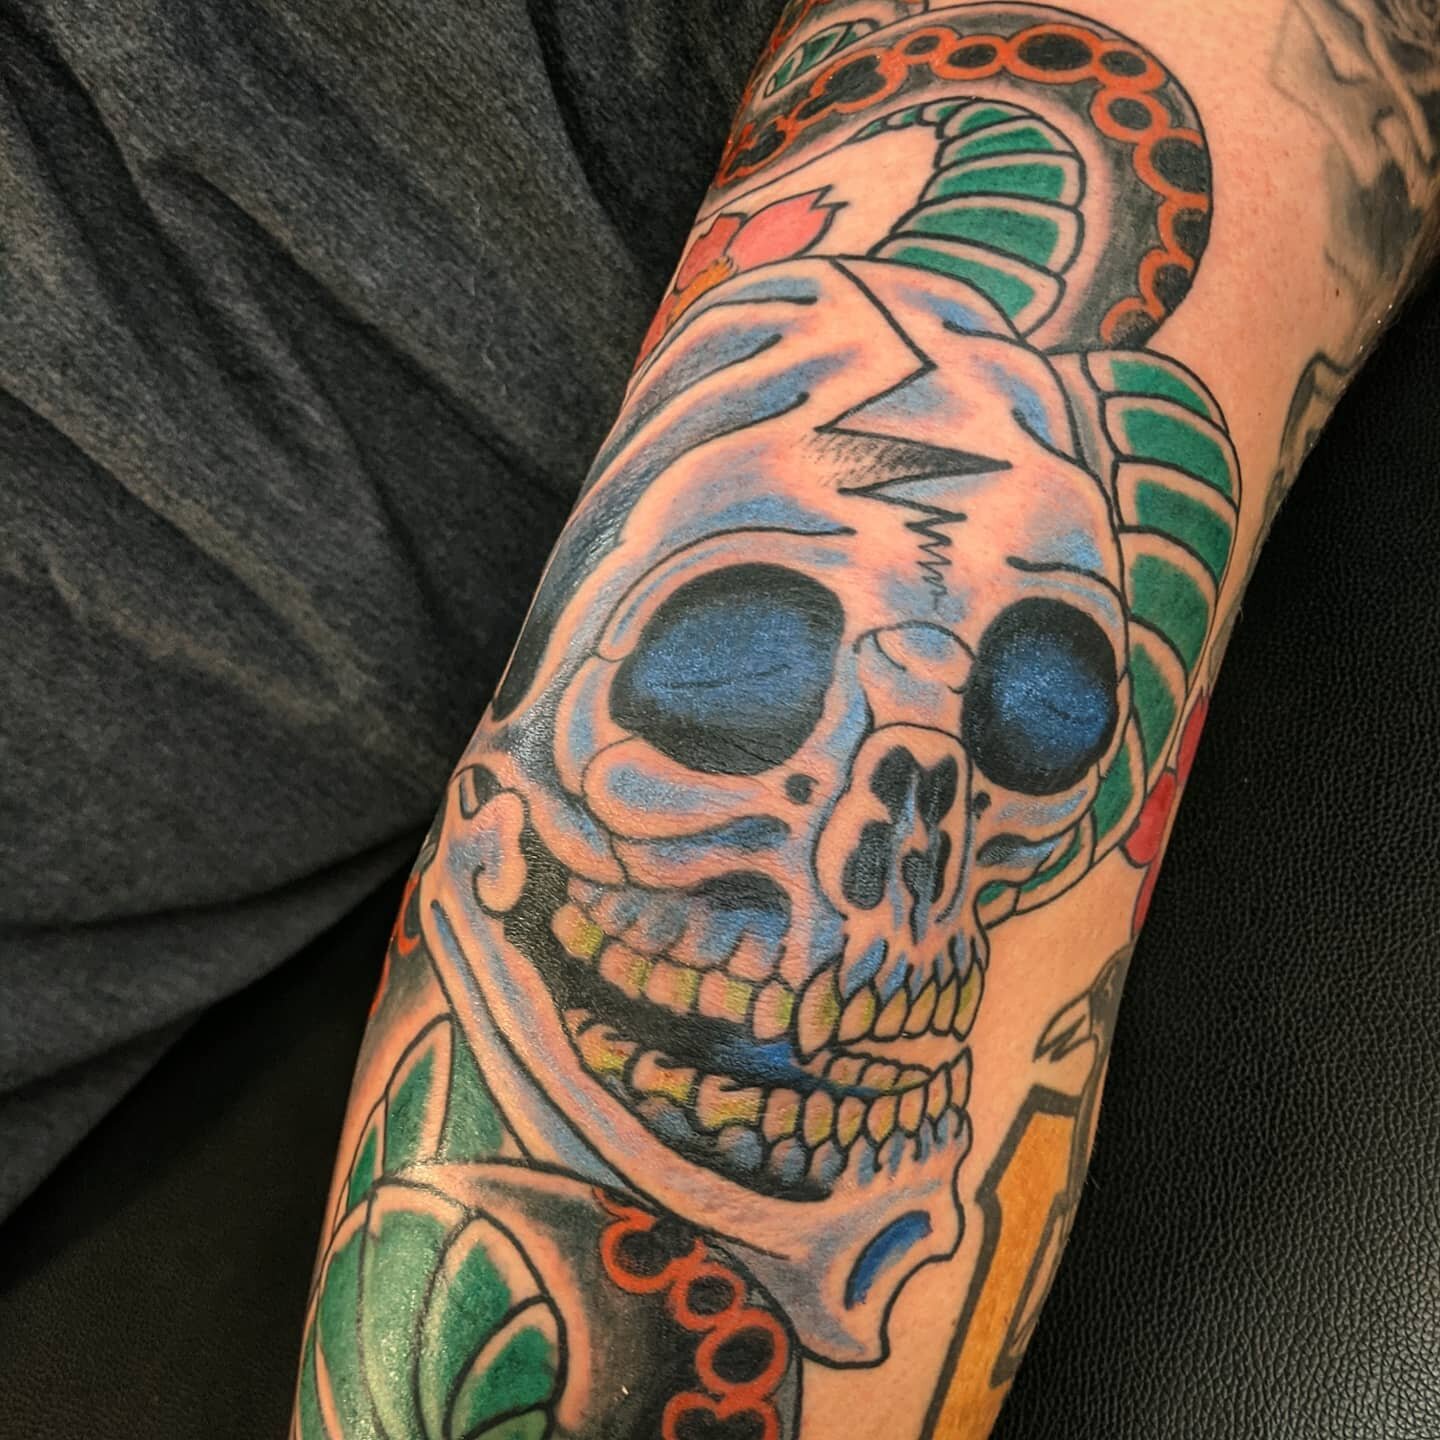 I'm always happy to blast over old tattoos as long as you let me make it cool 😎. Gonna add background next!

#threeriverstattoo #chromatattooink #coveruptattoo #skulltattoo #snaketattoo #meattube #swellbow